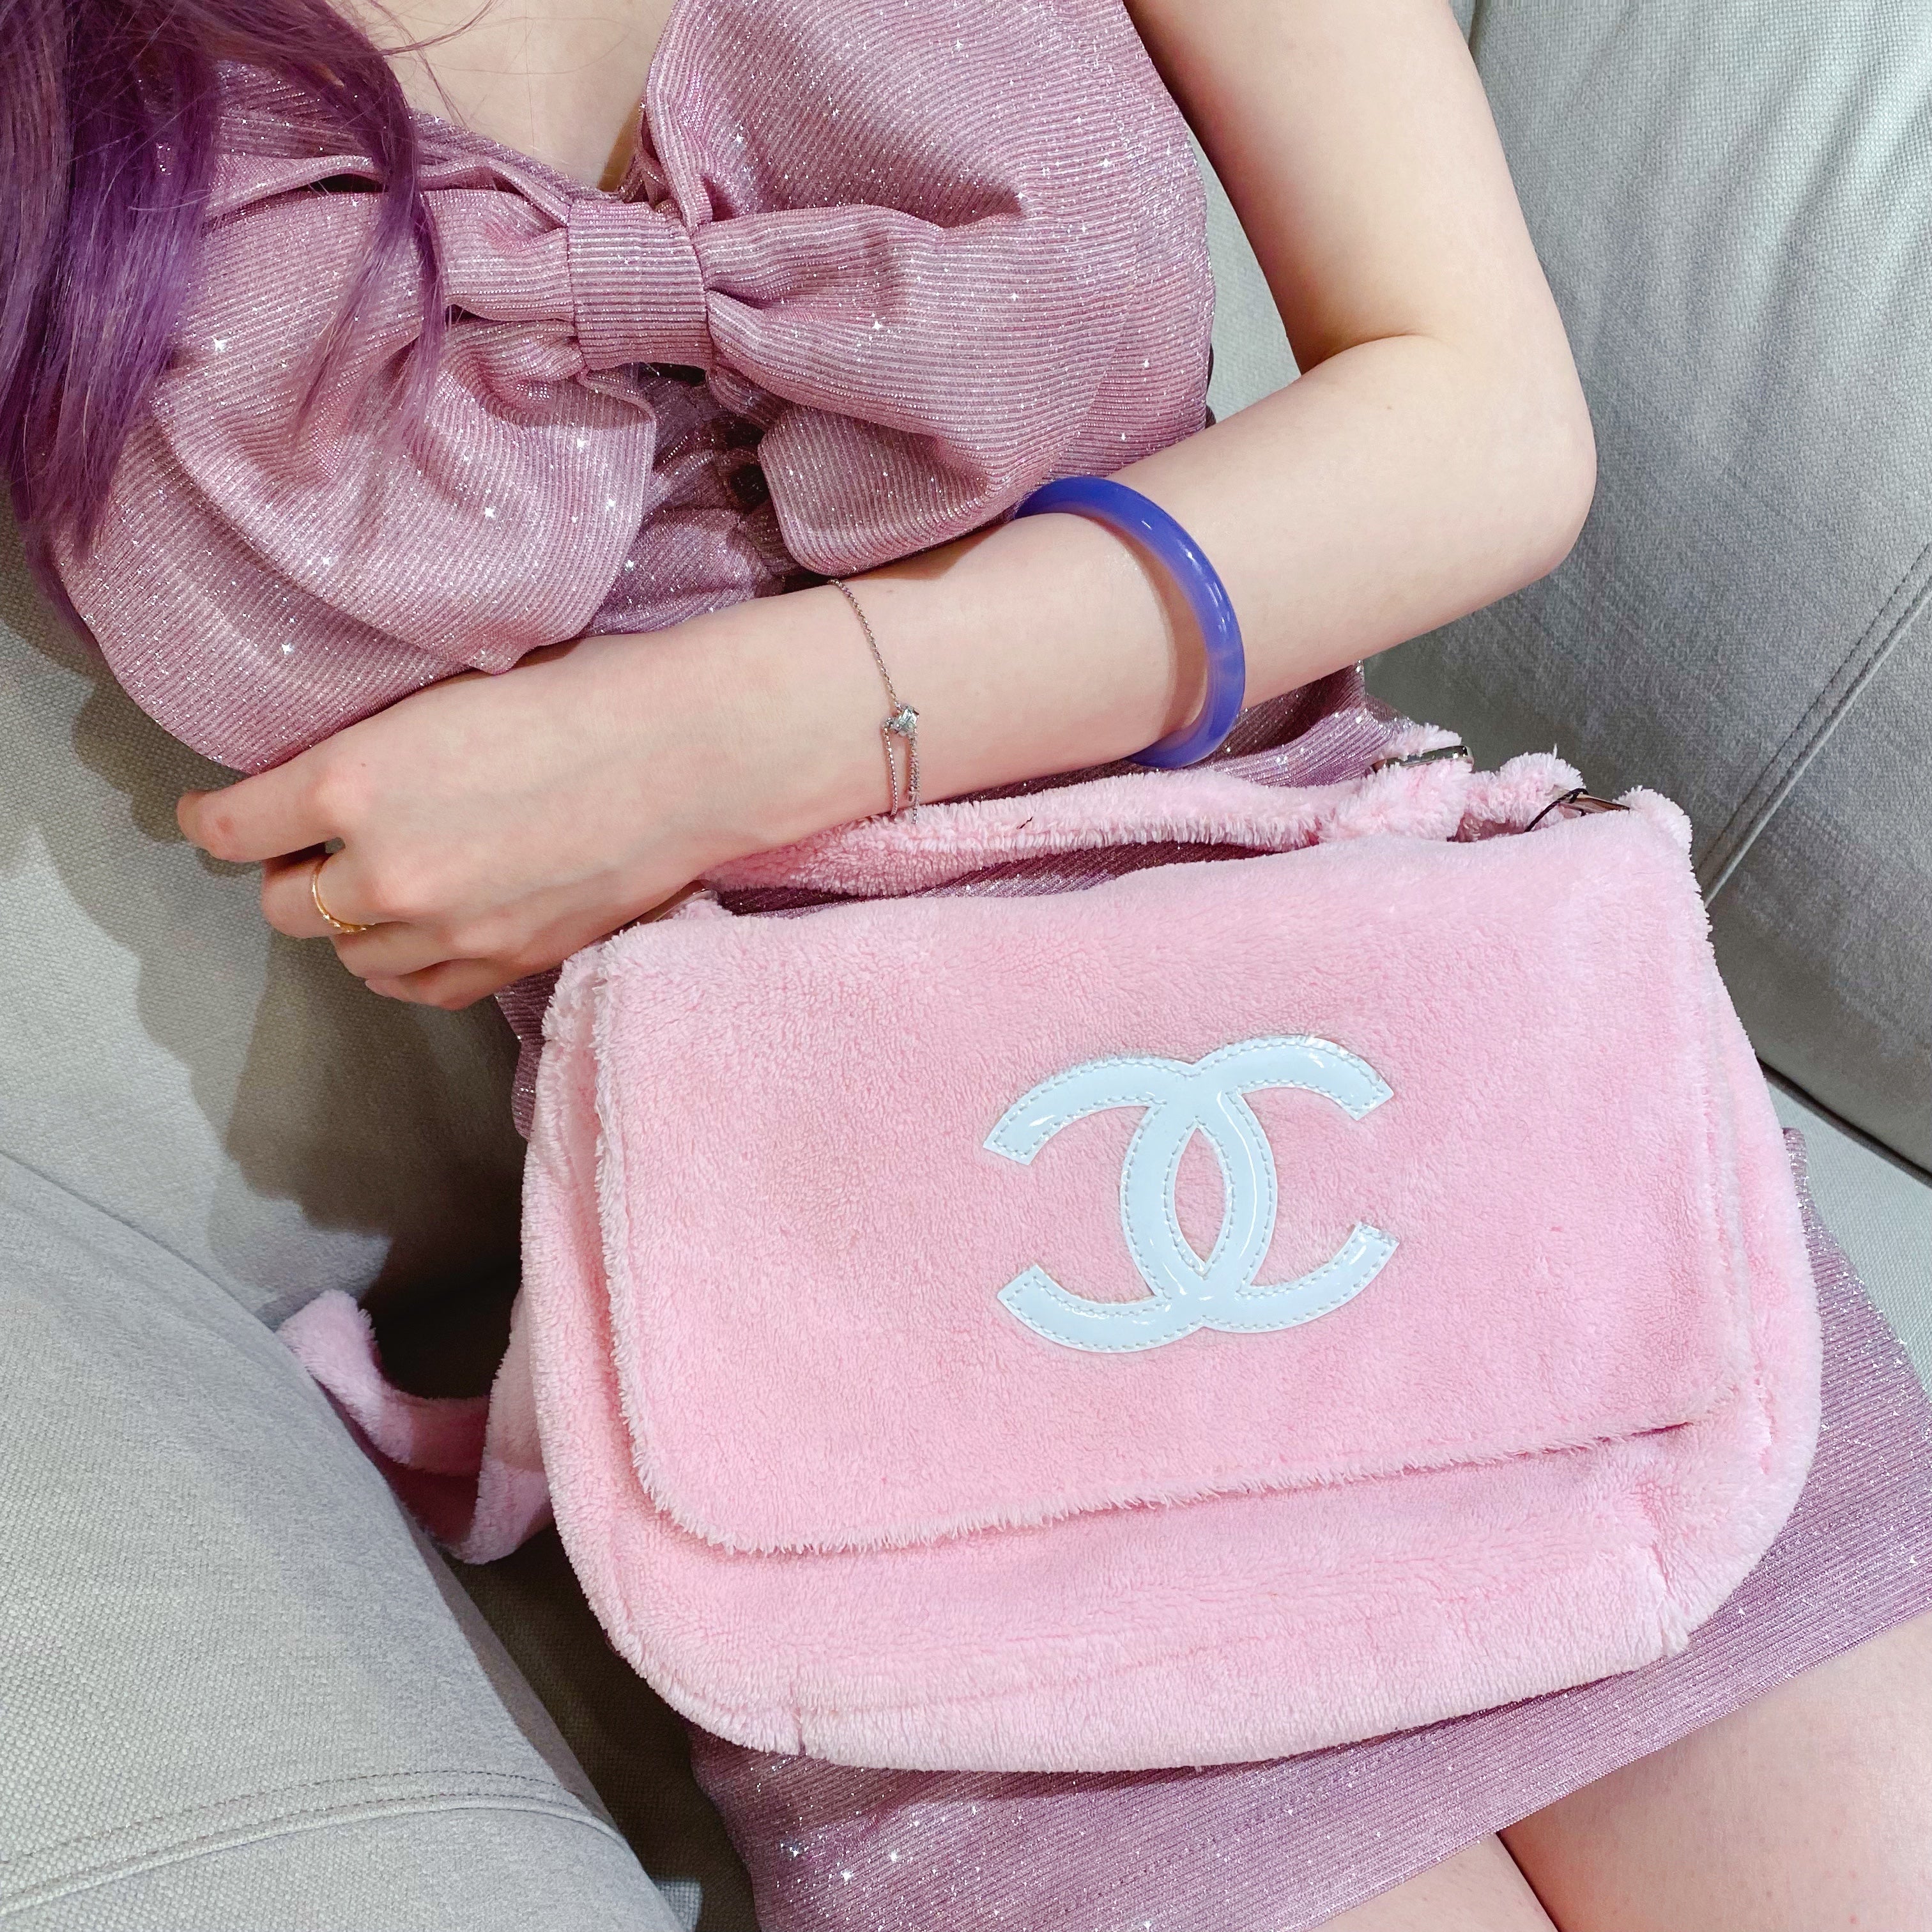 Chanel Beach Bag and Towel - Blue Travel, Accessories - CHA76762